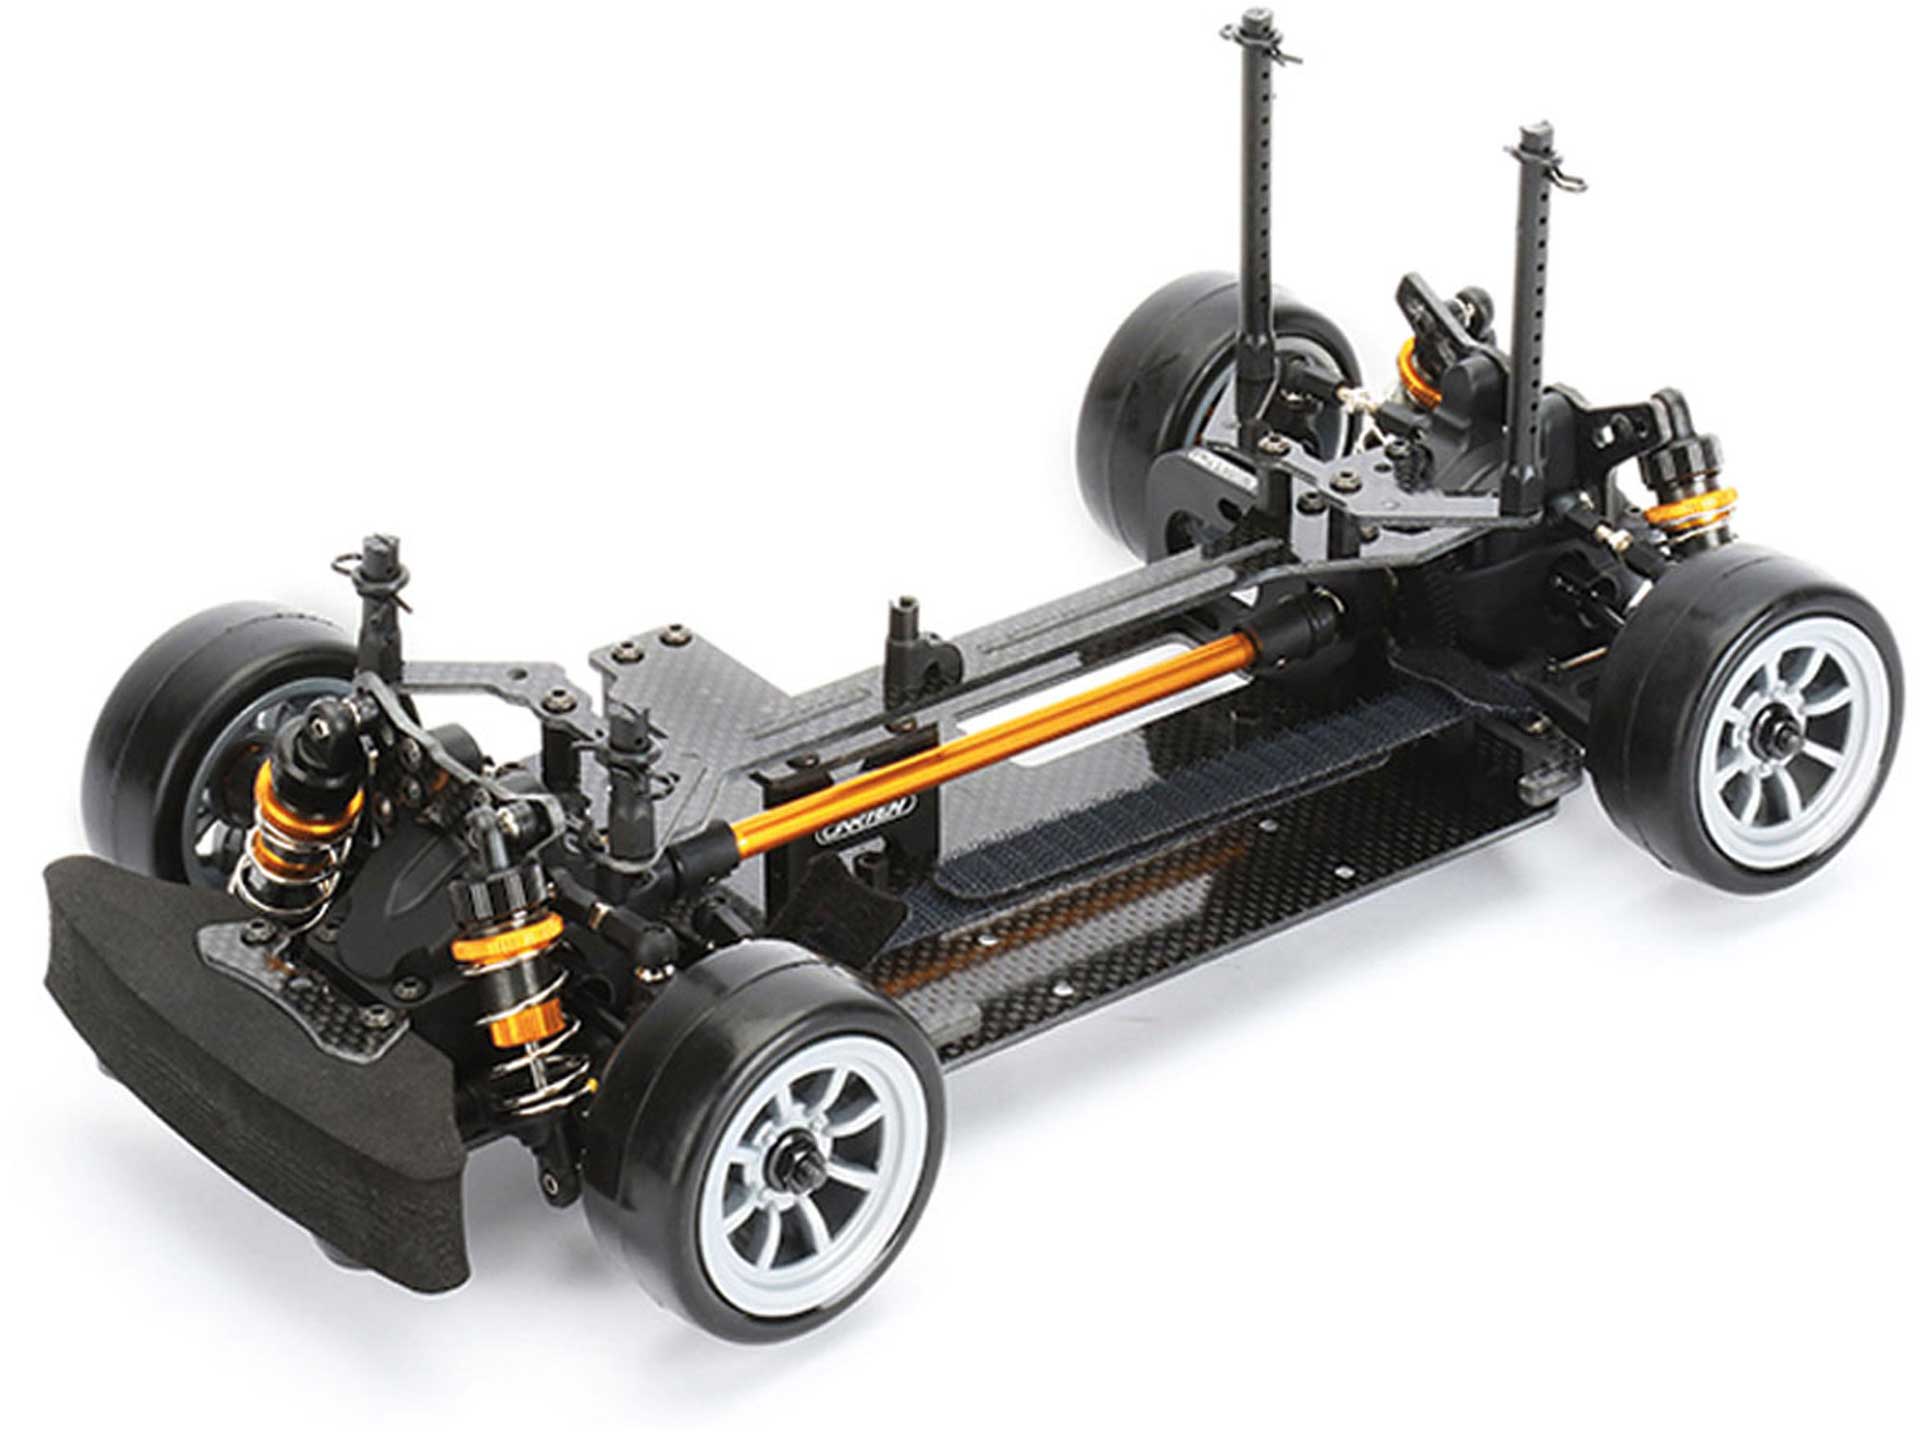 CARTEN M210R KIT 1/10 4WD EP M-CHASSIS